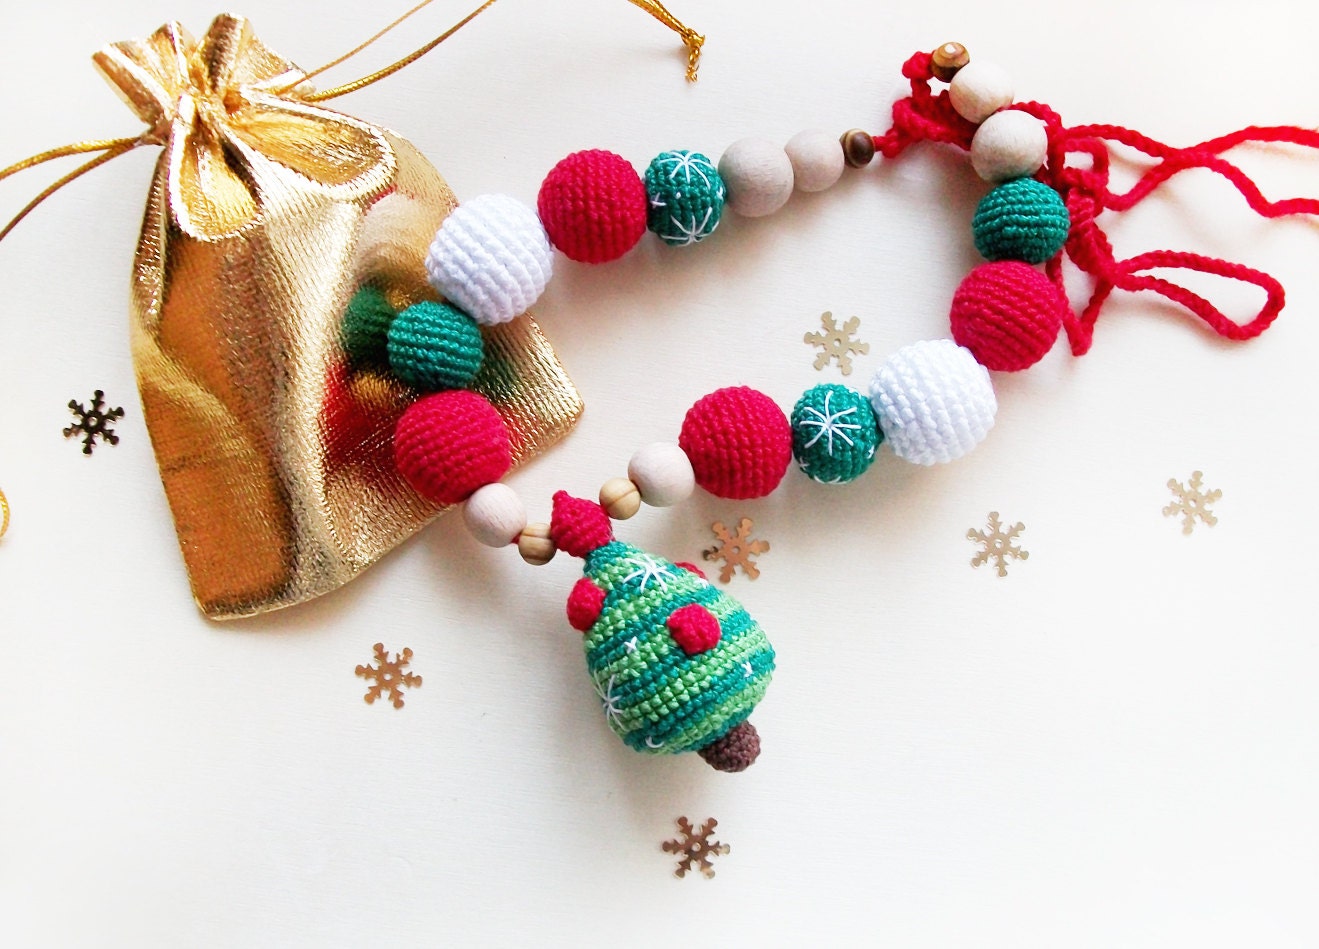 Christmas tree crochet  necklace / Eco-friendly jewellry / Teething Necklace/ Crochet Breastfeeding Necklace/ for moms  and babies - SweetLittleCandyShop